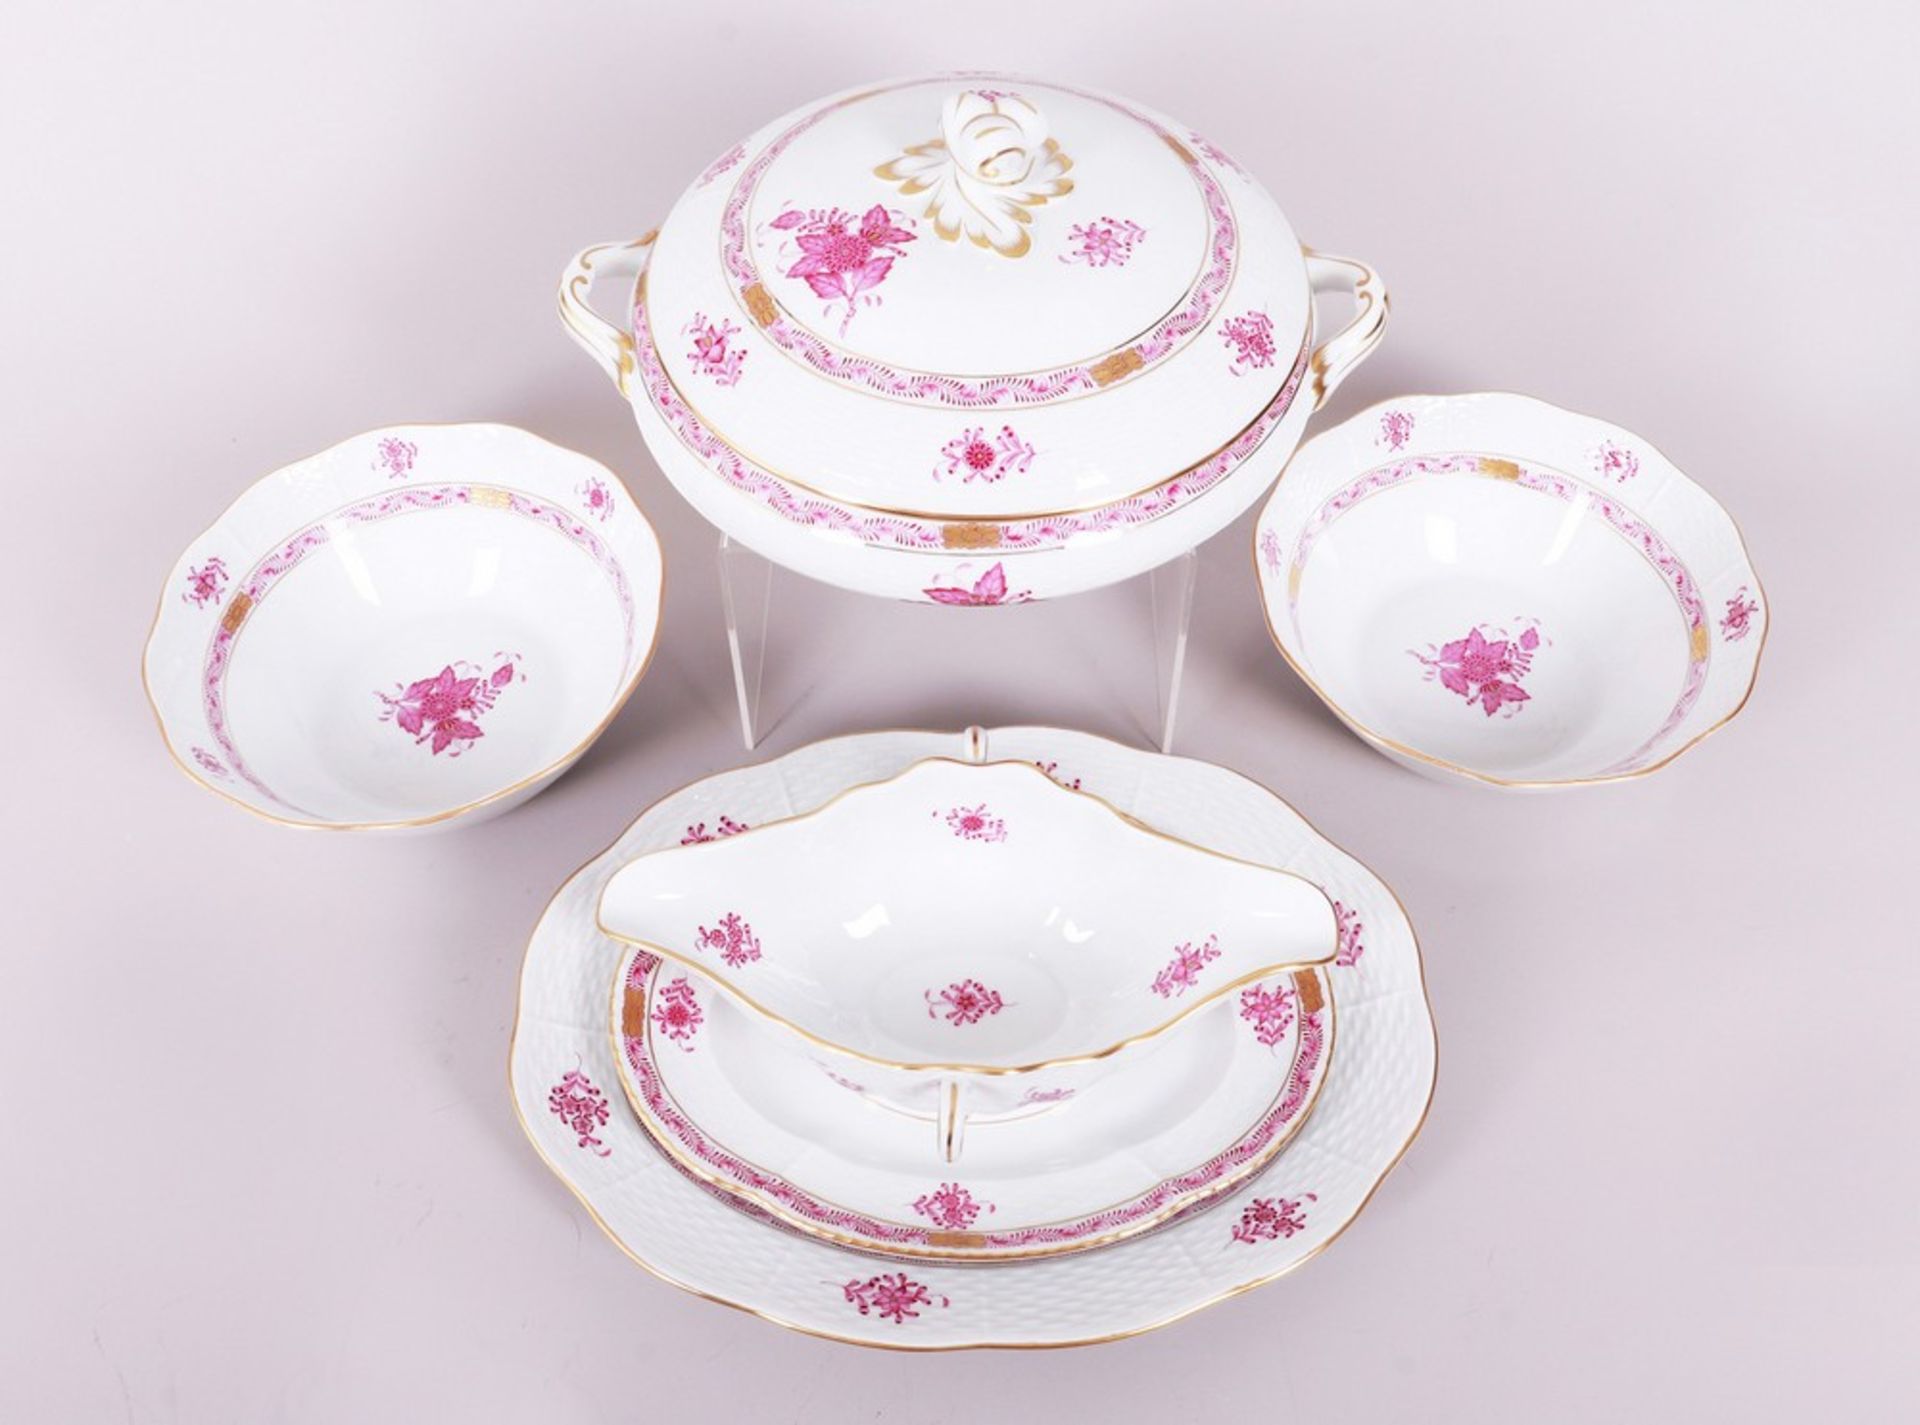 Dinner service, Herend, Hungary, “Apponyi Purple” decor, late 20th C. - Image 3 of 4